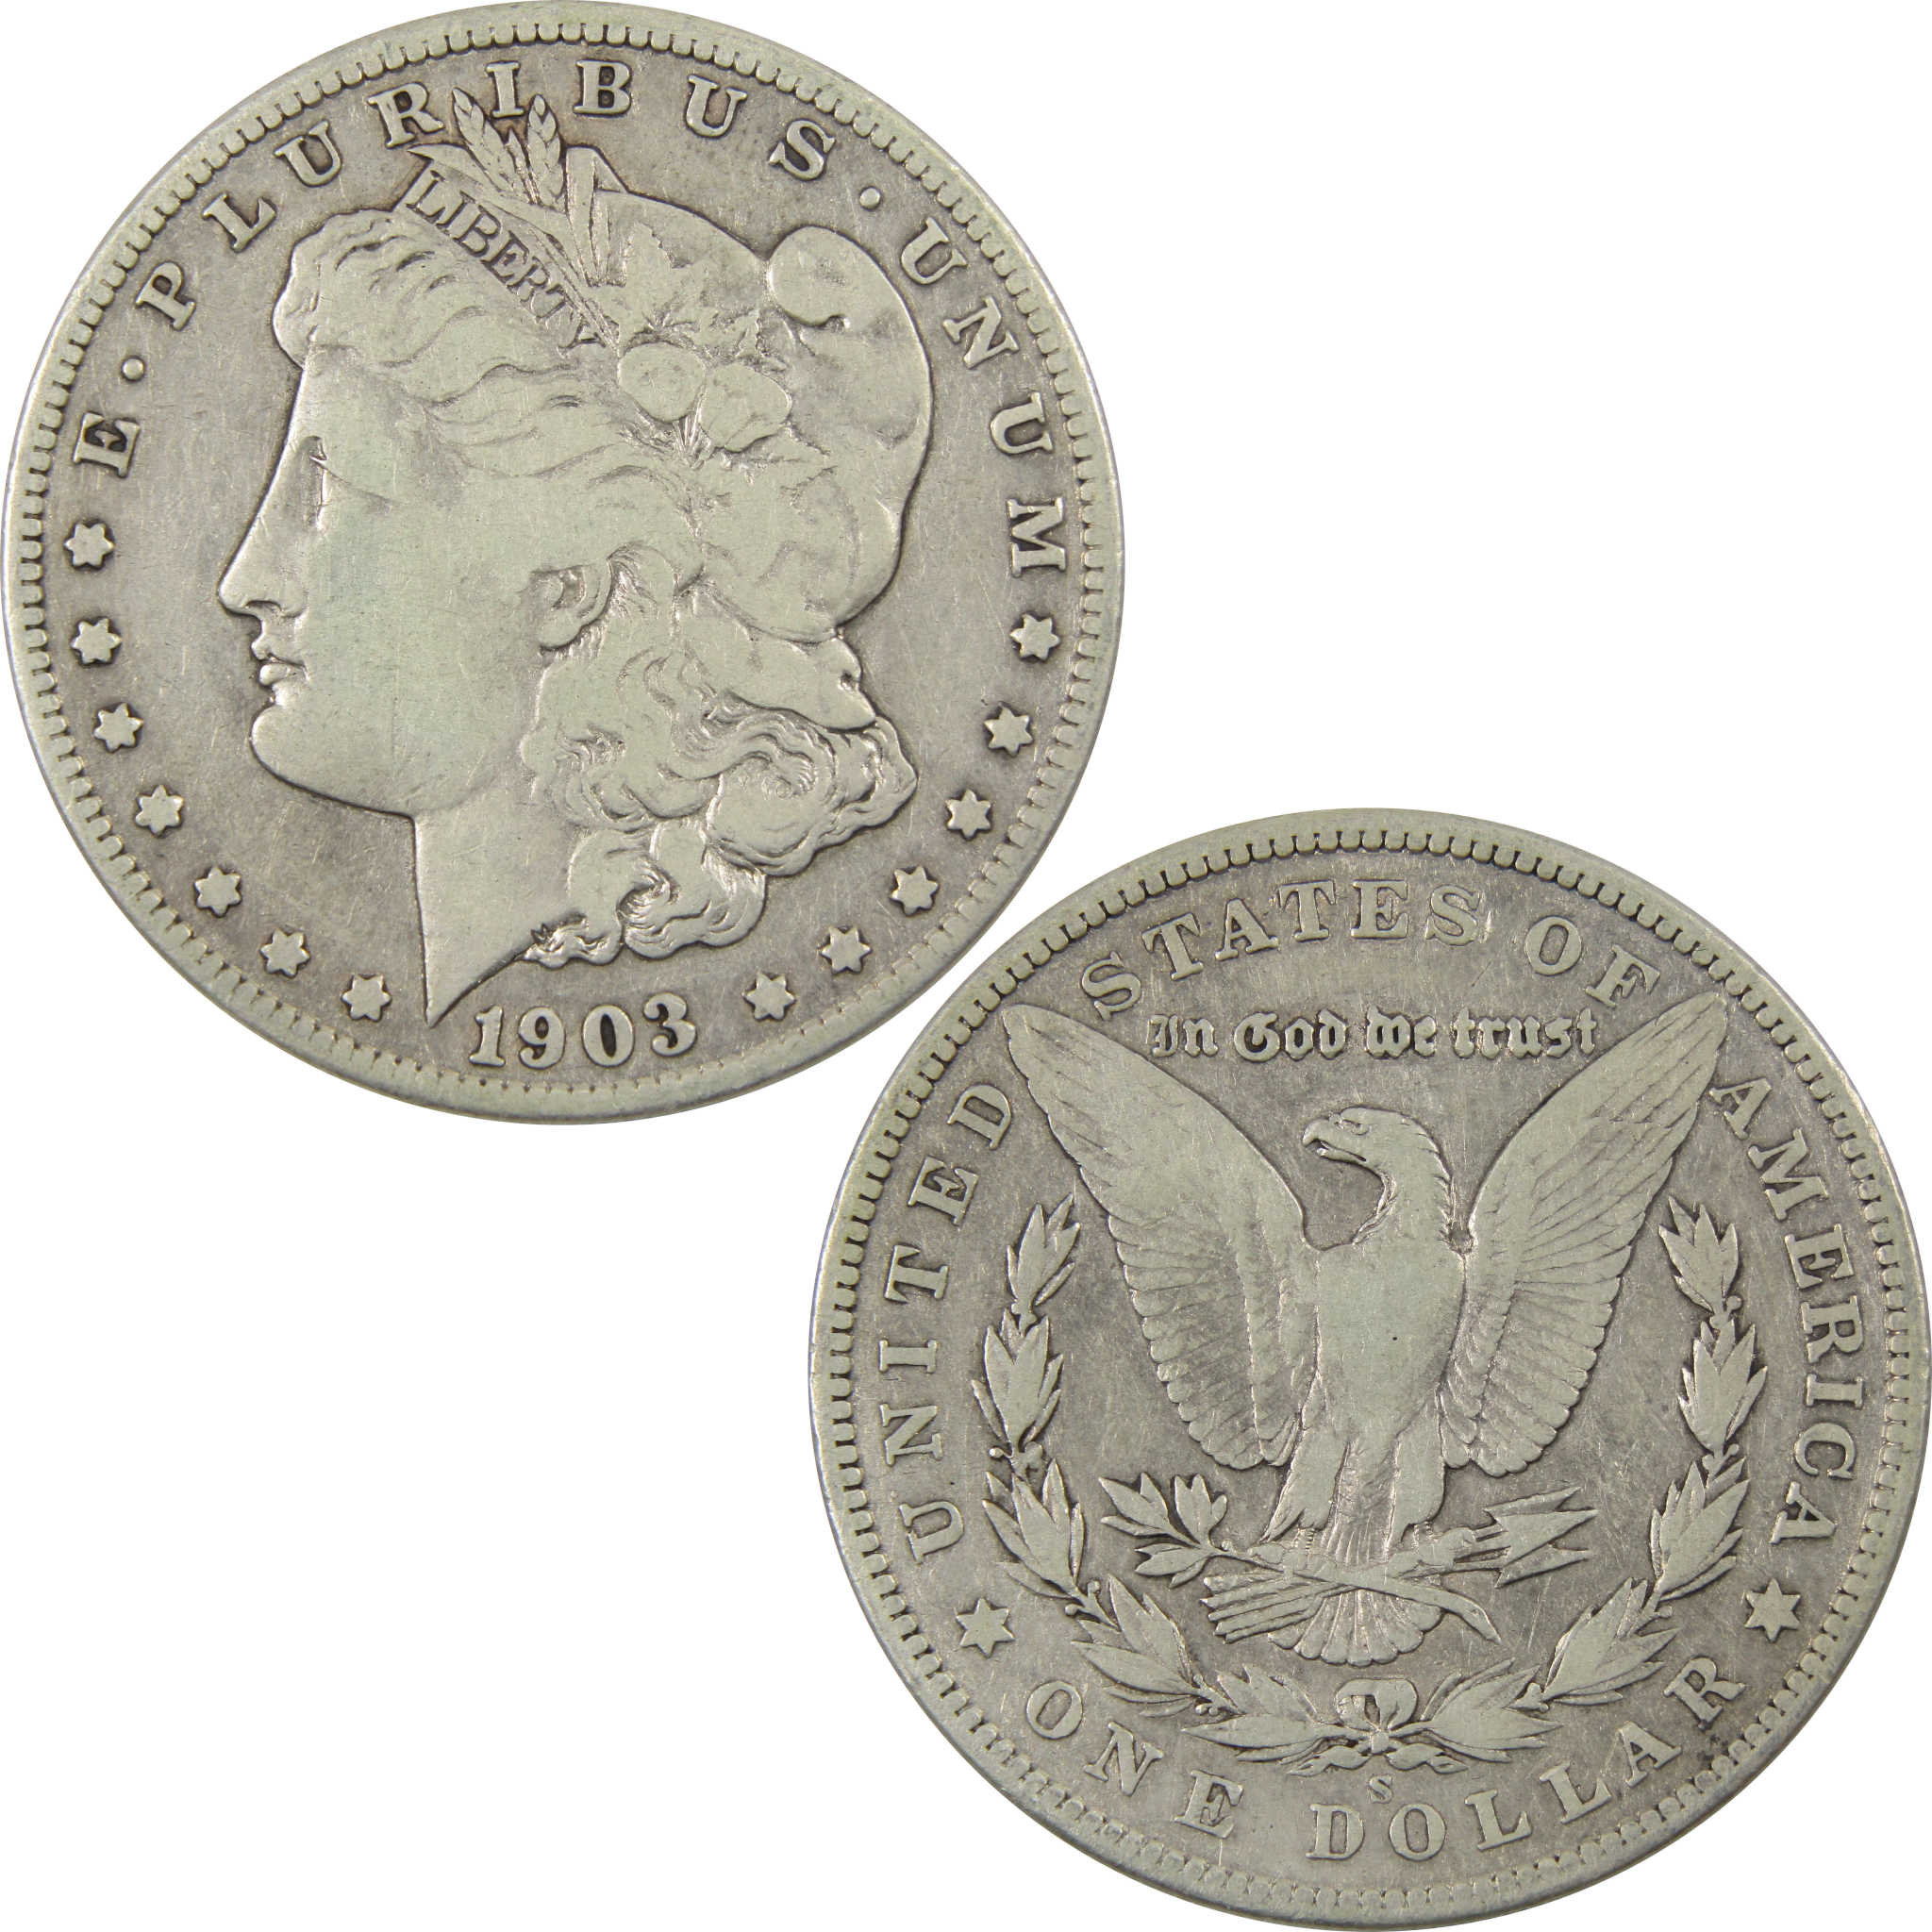 1903 S Morgan Dollar VG Very Good Details 90% Silver $1 Coin SKU:I9415 - Morgan coin - Morgan silver dollar - Morgan silver dollar for sale - Profile Coins &amp; Collectibles